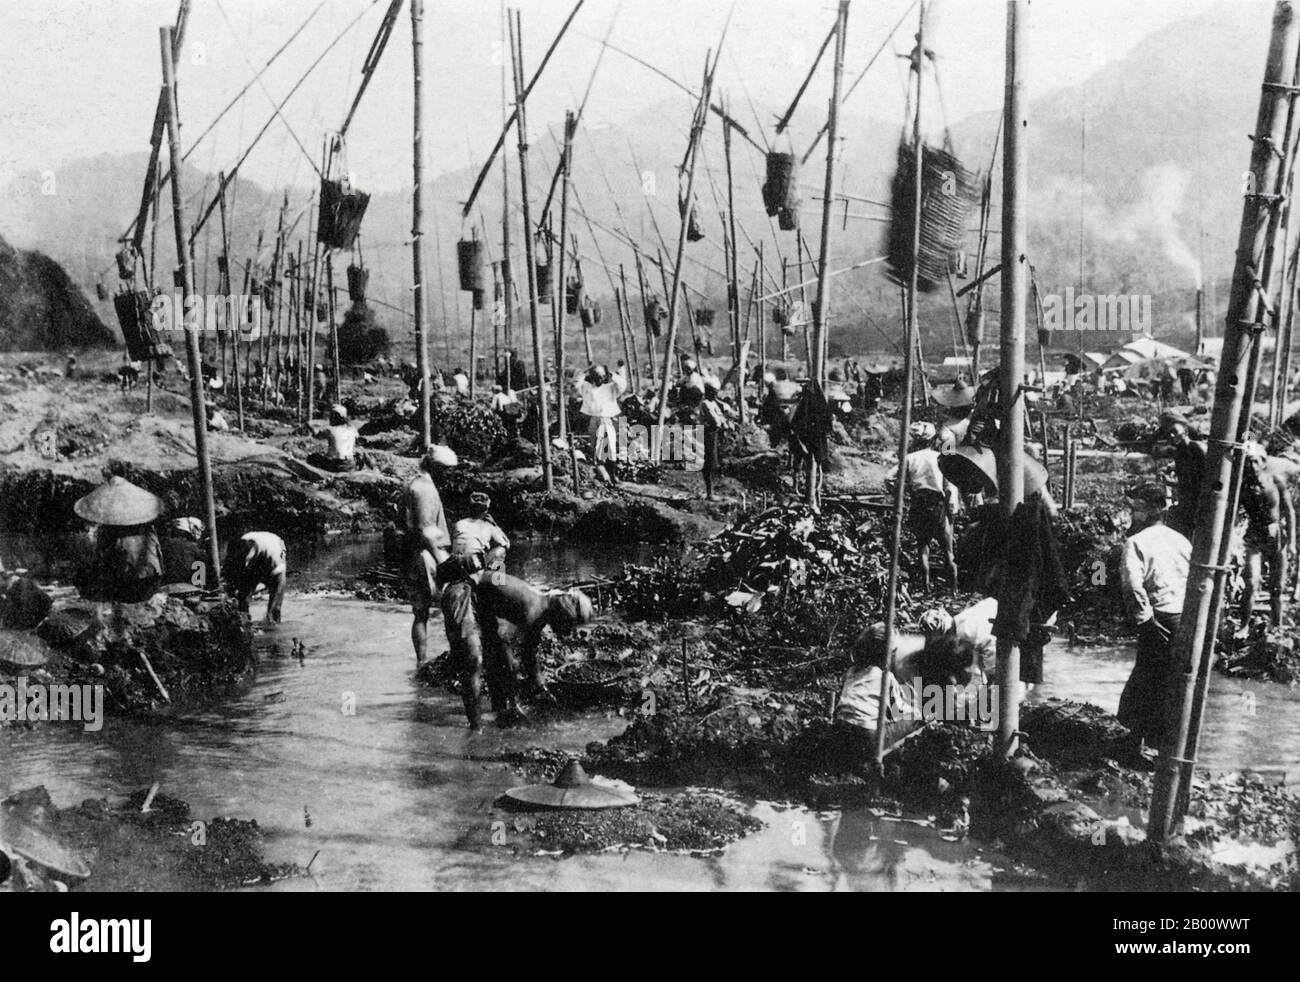 Burma/Myanmar: A 1905 photograph of workers at a ruby mine in Tachilek in Shan State.  Nowadays, 90% of the world's rubies come from Burma. Prized for their purity and hue, the majority of rubies are sold to Thailand. The 'Valley of Rubies', the mountainous Mogok area, 200 km north of Mandalay, is noted for its rare pigeon's blood rubies and blue sapphires. Human rights groups, however, have slammed the working conditions in the mines as horrendous. Stock Photo